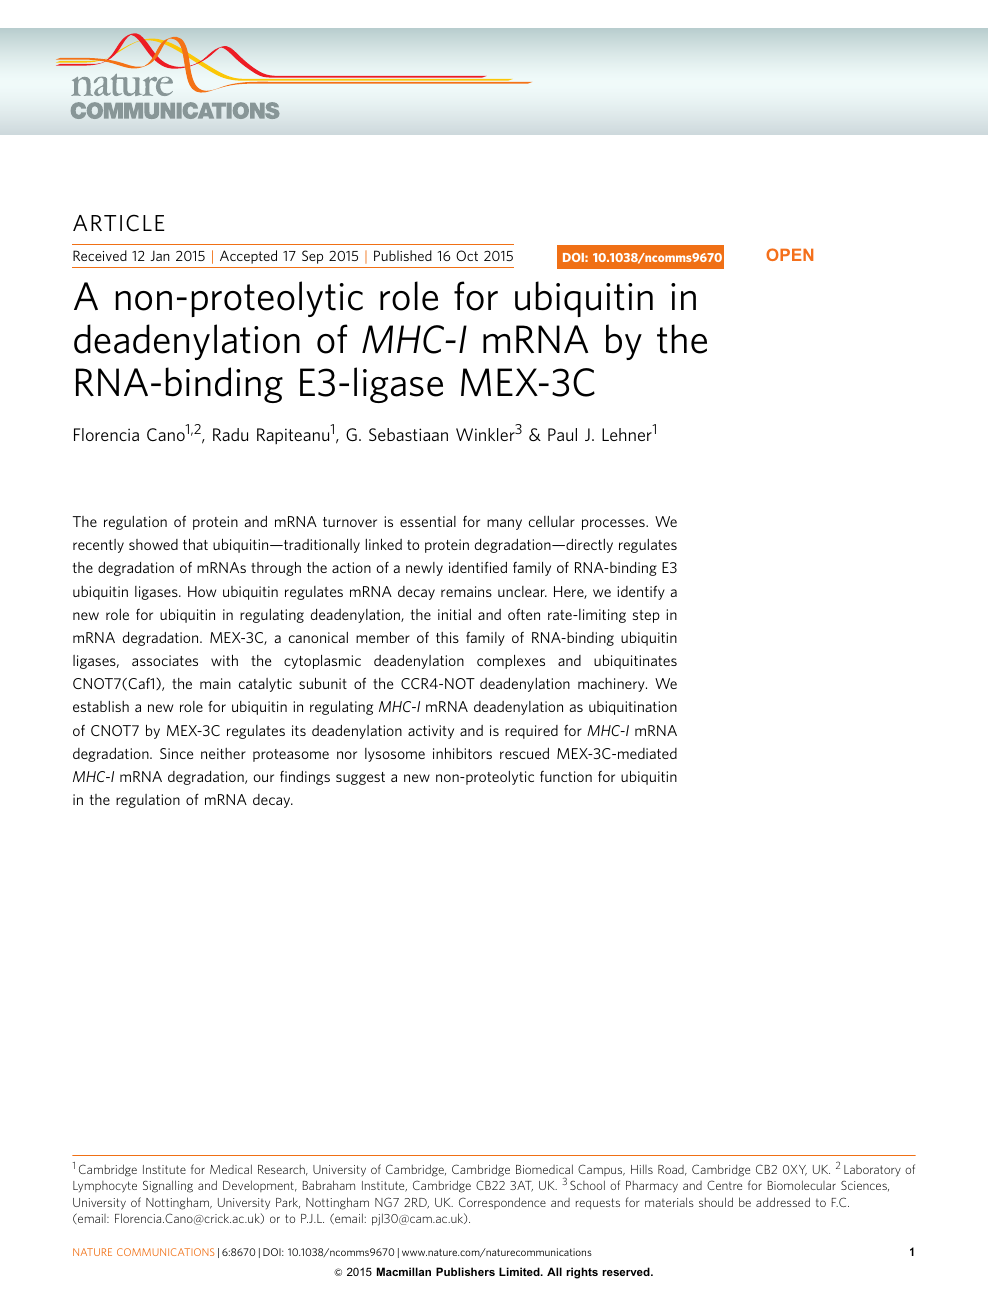 A Non Proteolytic Role For Ubiquitin In Deadenylation Of Mhc I Mrna By The Rna Binding Ligase Mex 3c Topic Of Research Paper In Biological Sciences Download Scholarly Article Pdf And Read For Free On